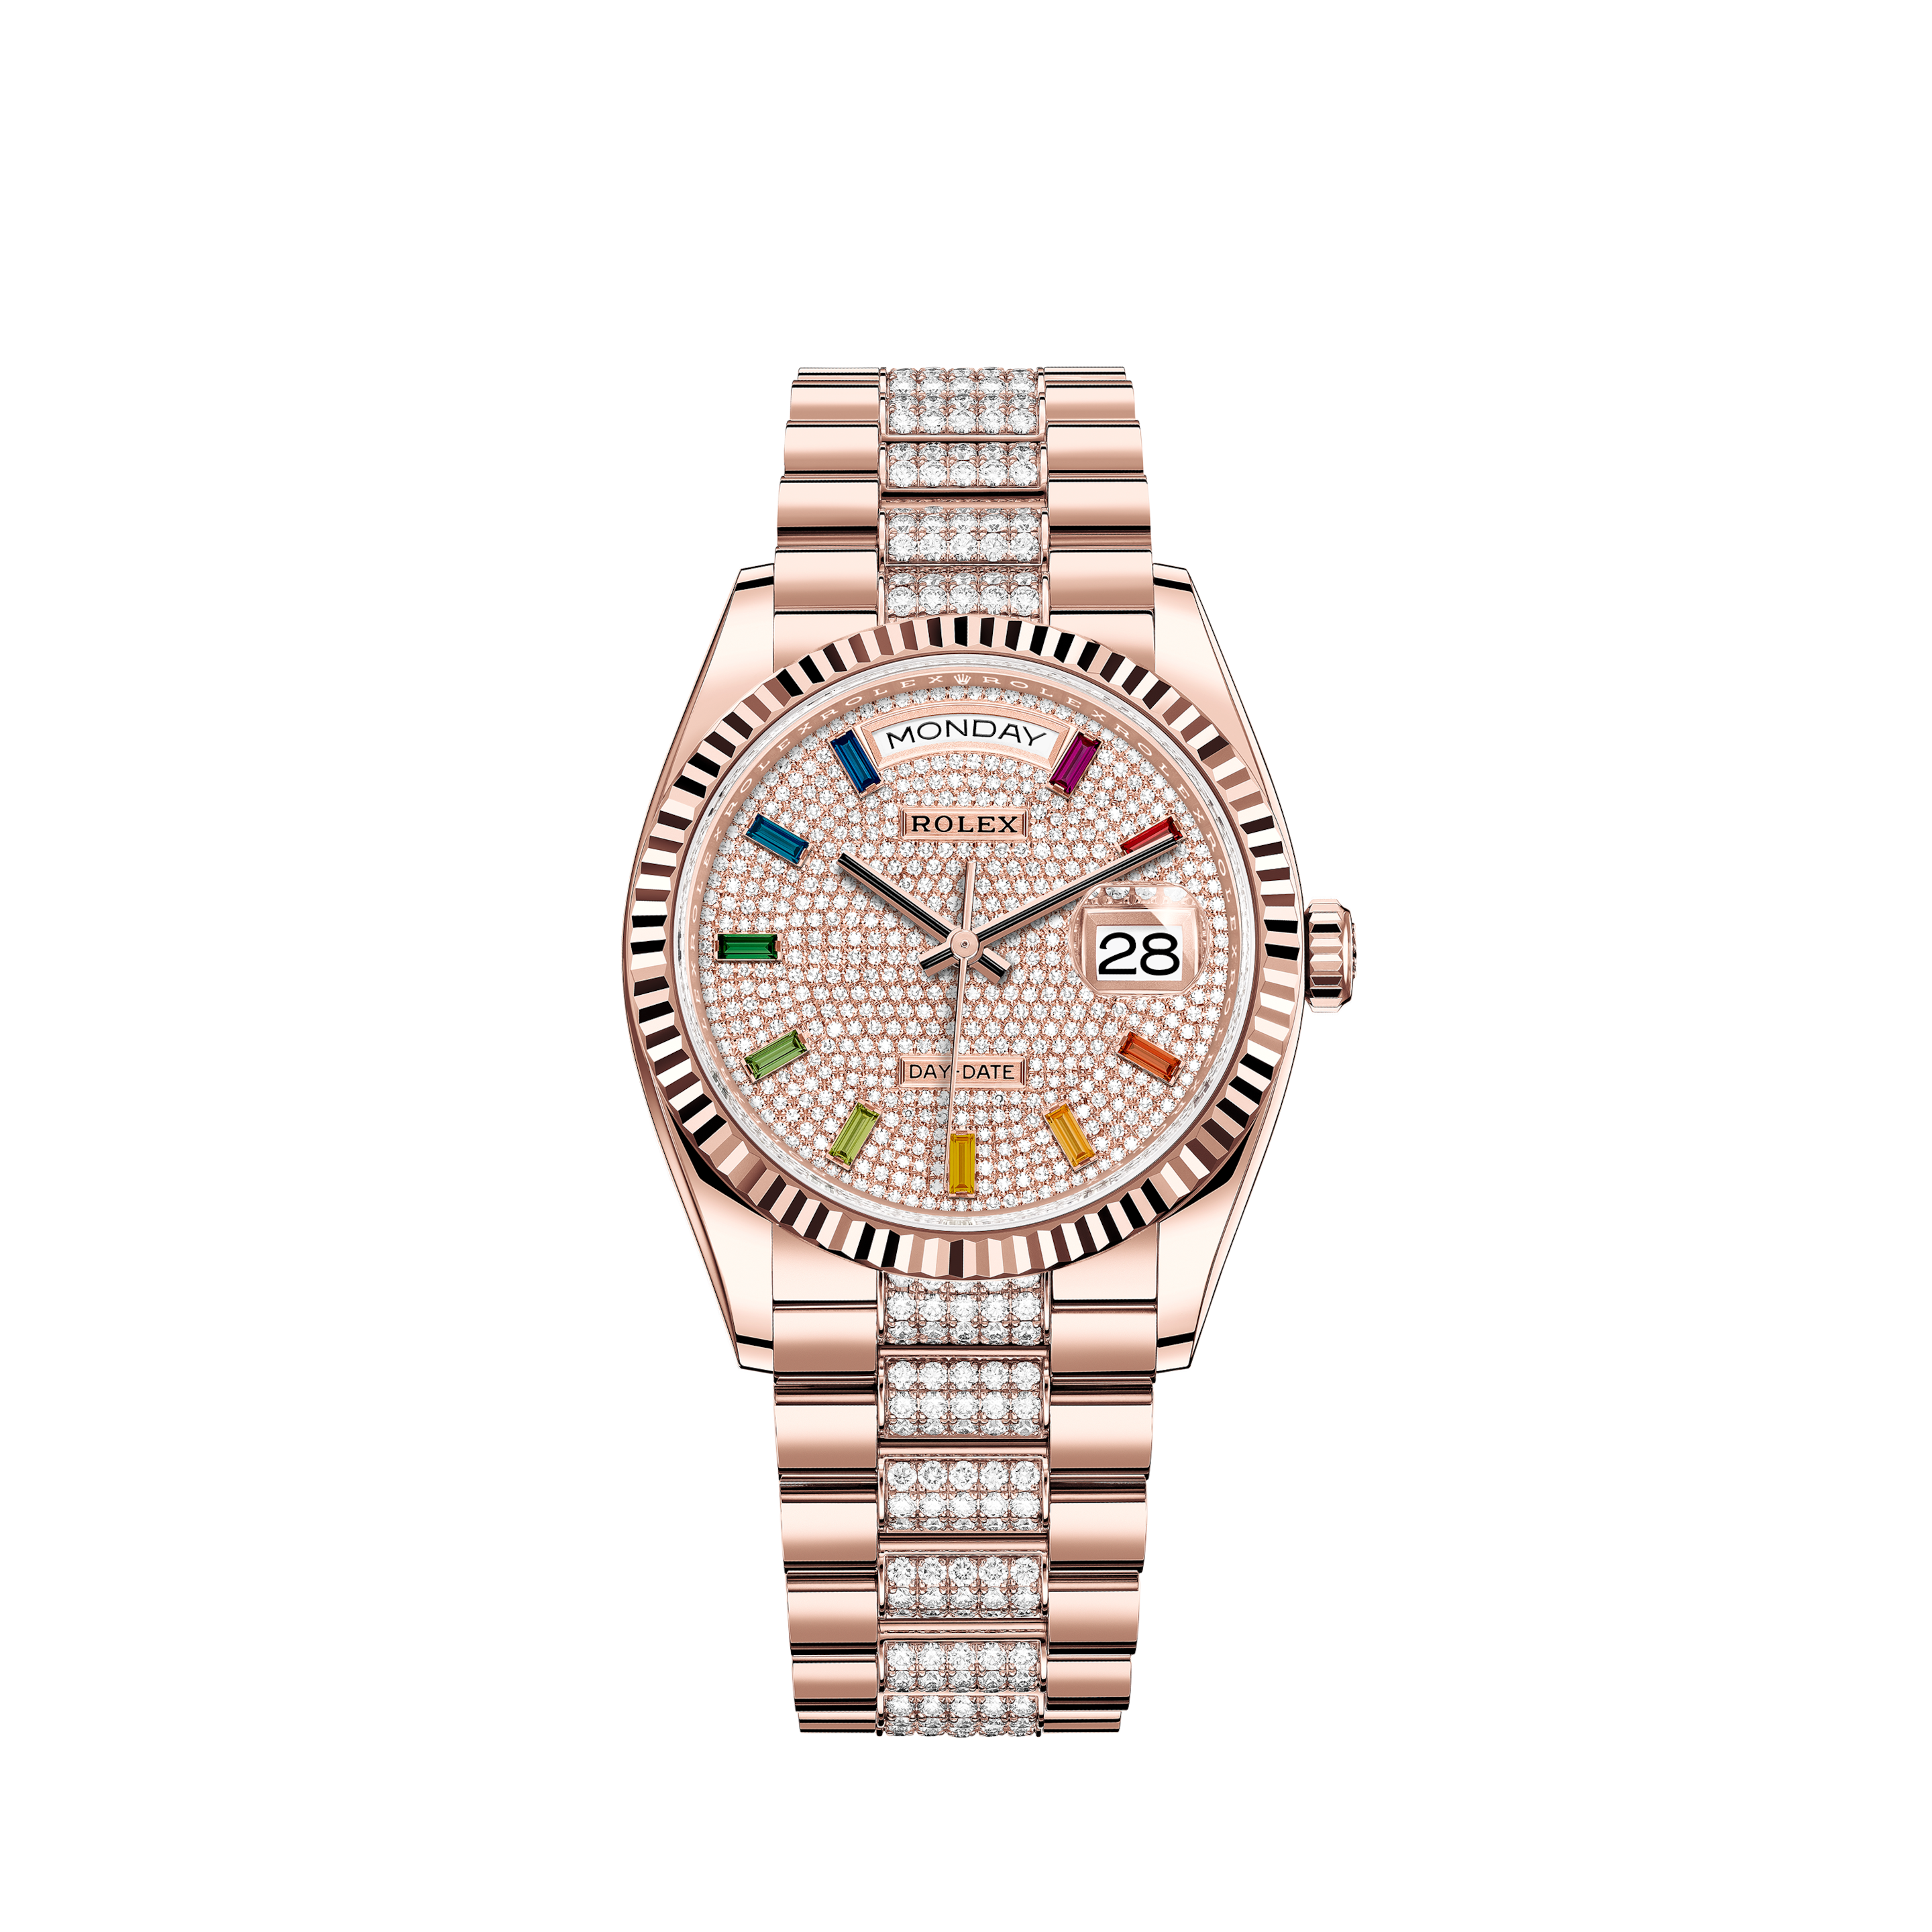 Rolex Datejust 36mm 16220 Ivory Roman Dial Jubilee Sapphire With PapersRolex Datejust 36mm 16220 Steel Gray Dial Diamond Index 36mm